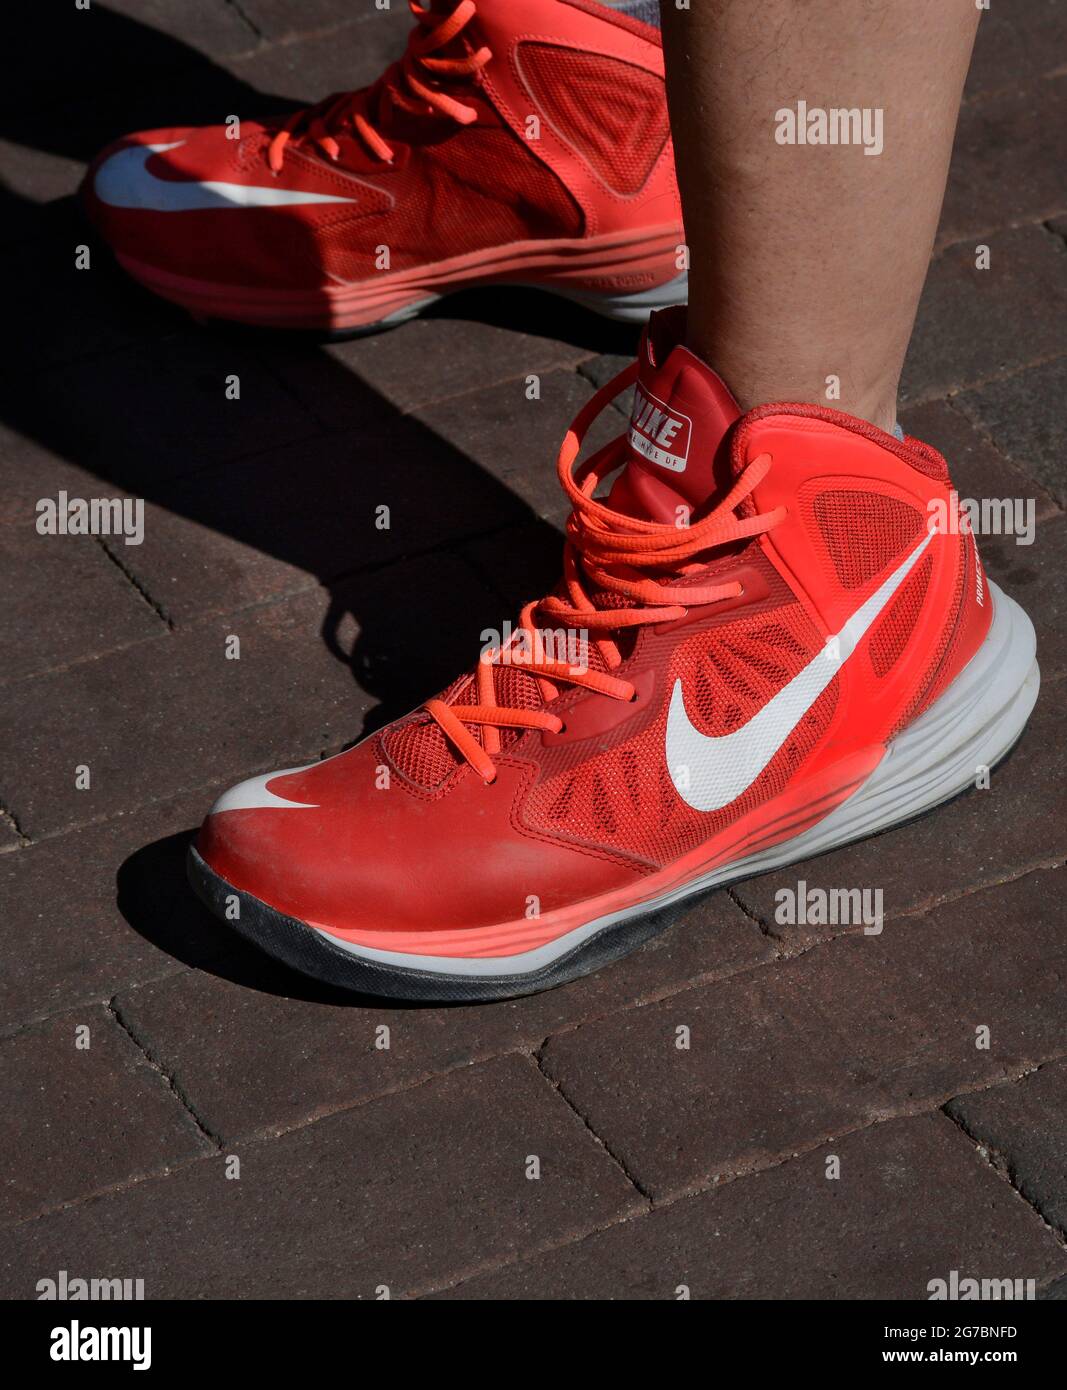 Nike Tennis Shoes High Resolution Stock Photography and Images - Alamy